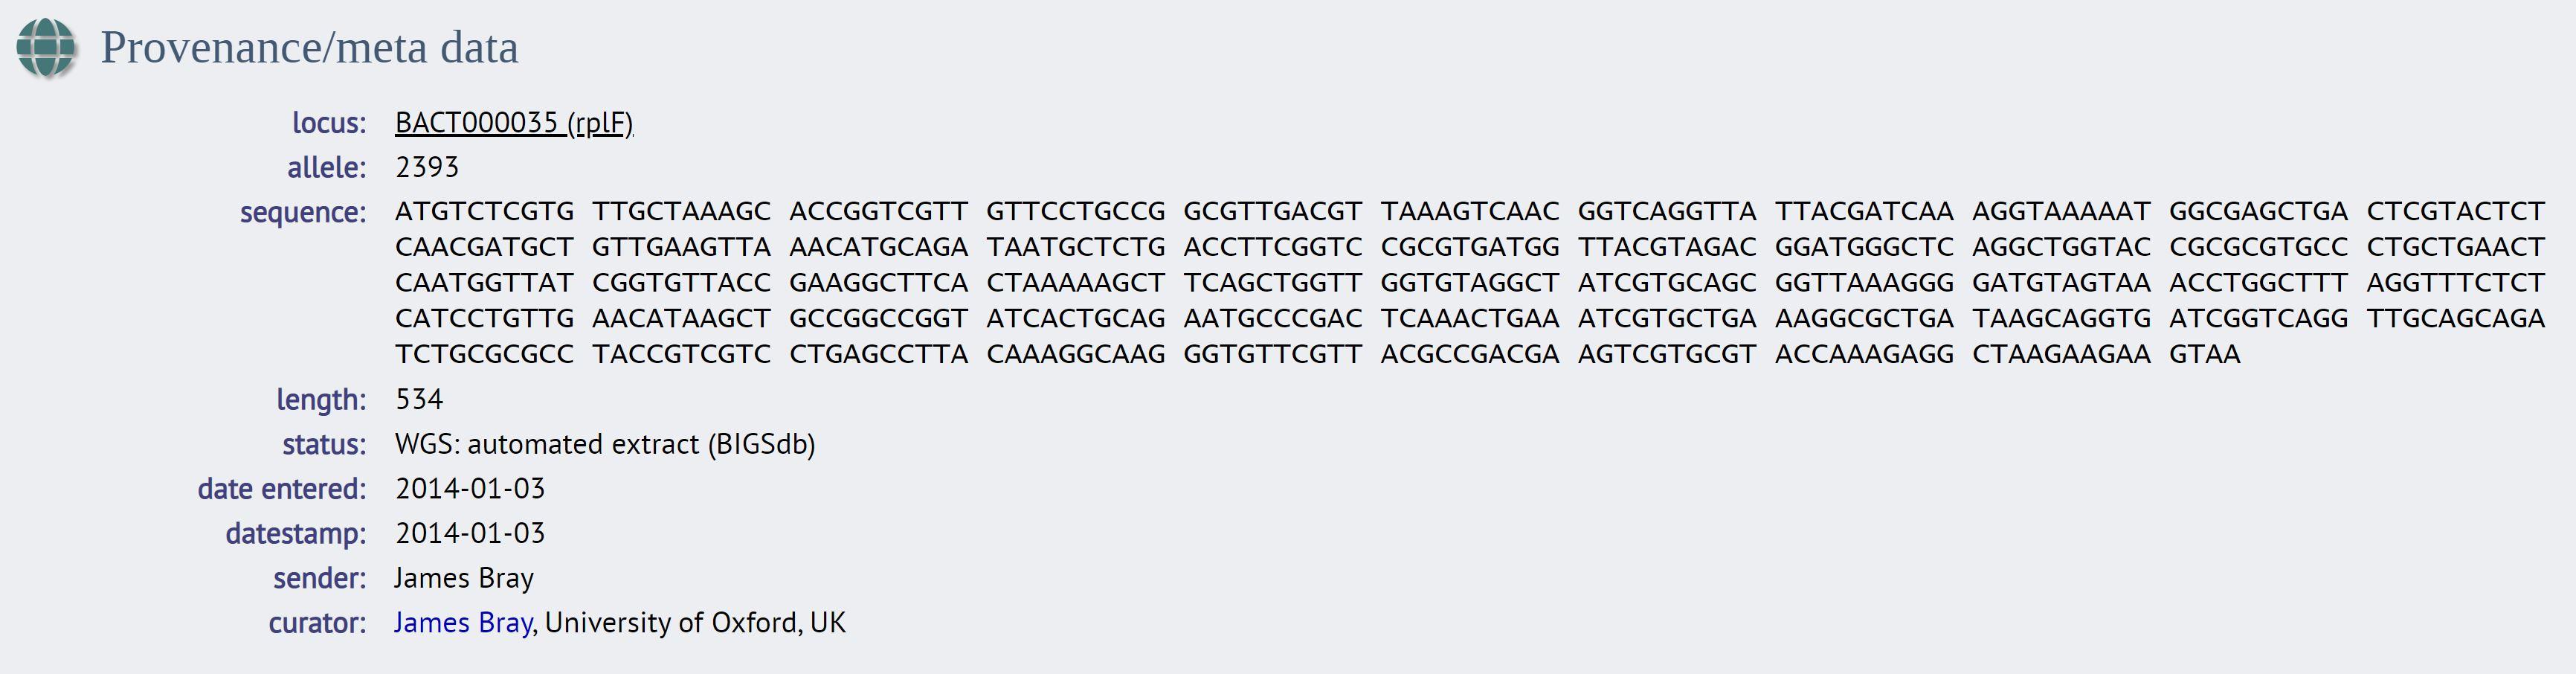  An example of the rplF gene (also called BACT000035), showing the allele number 2393